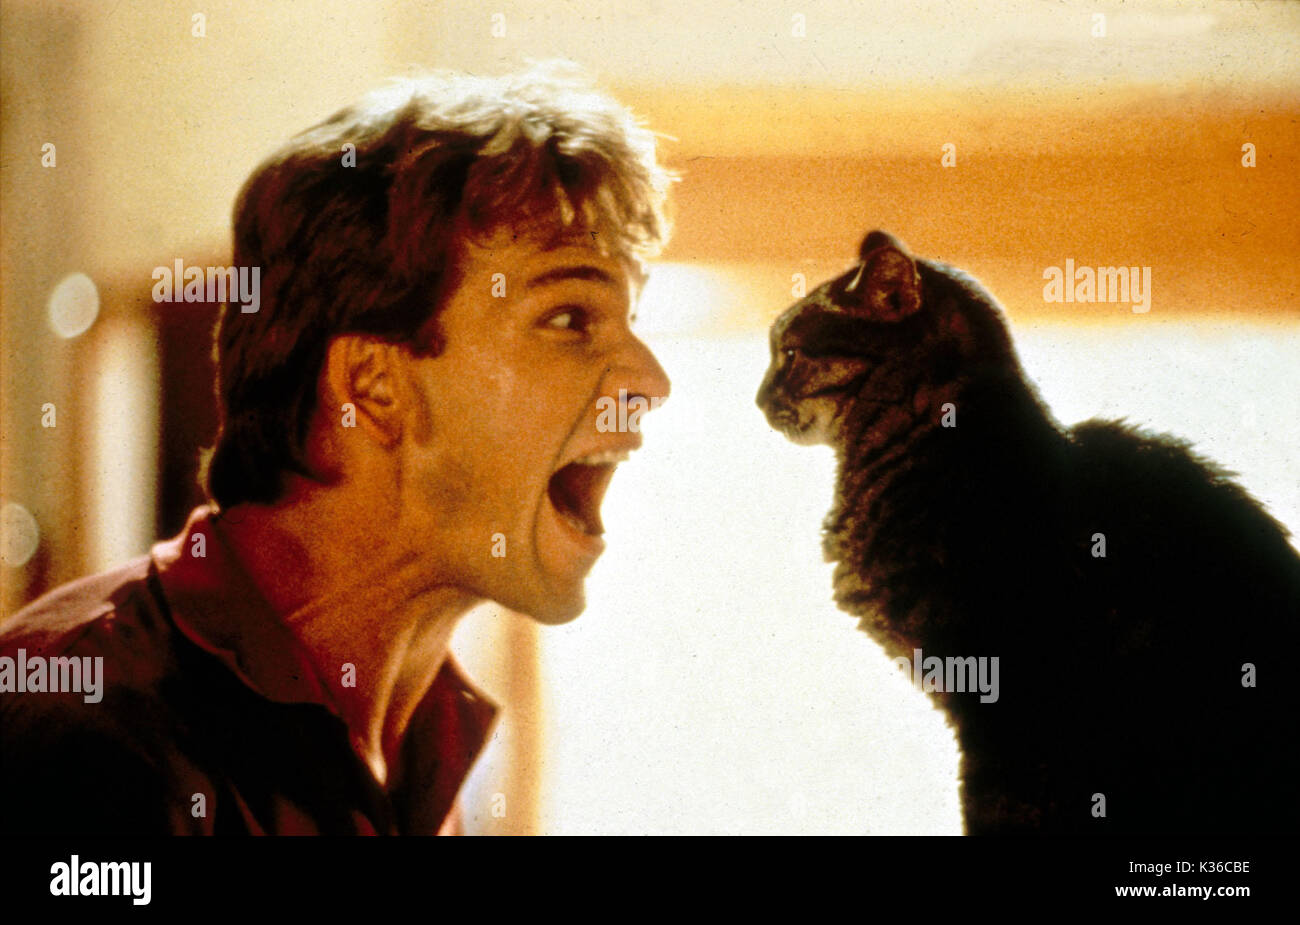 GHOST PARAMOUNT PICTURES PATRICK SWAYZE screaming; shouting; cat     Date: 1990 Stock Photo